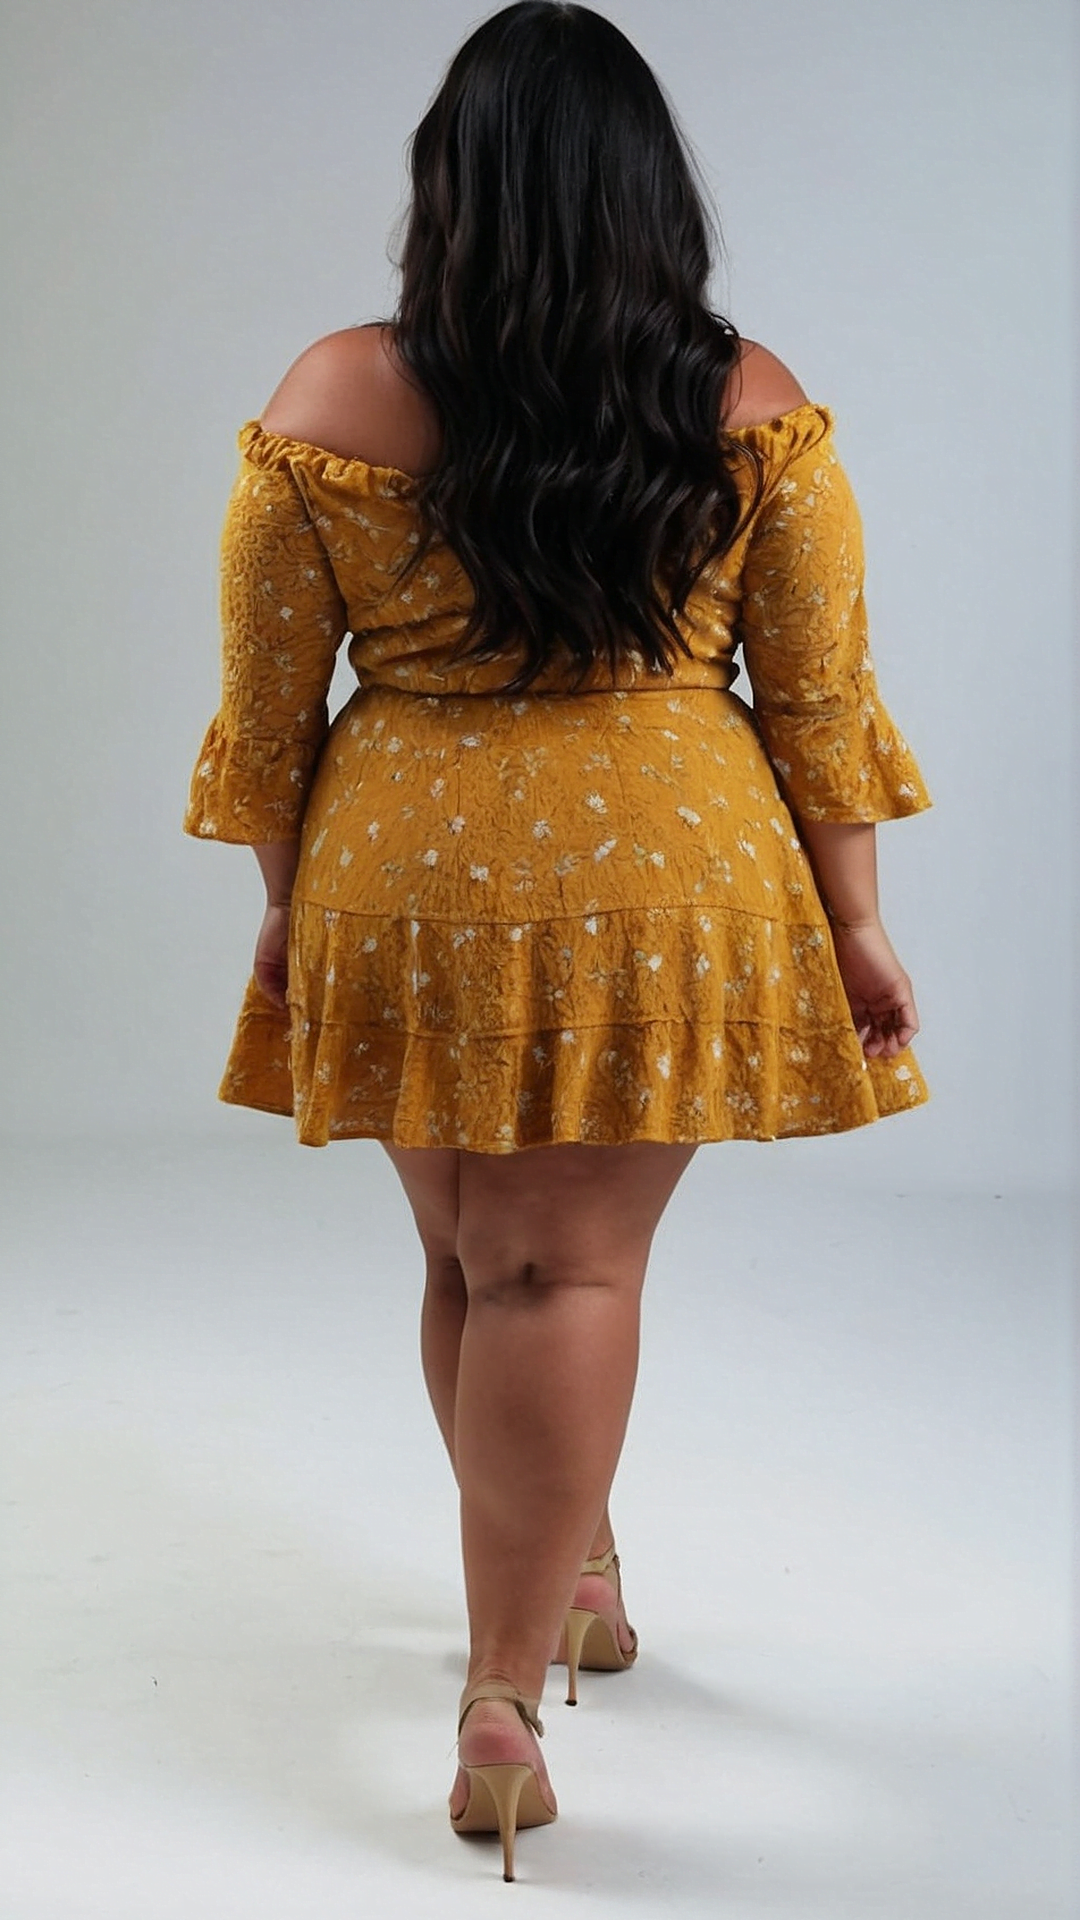 10 Plus-Size Summer Outfits and How to Rock Them